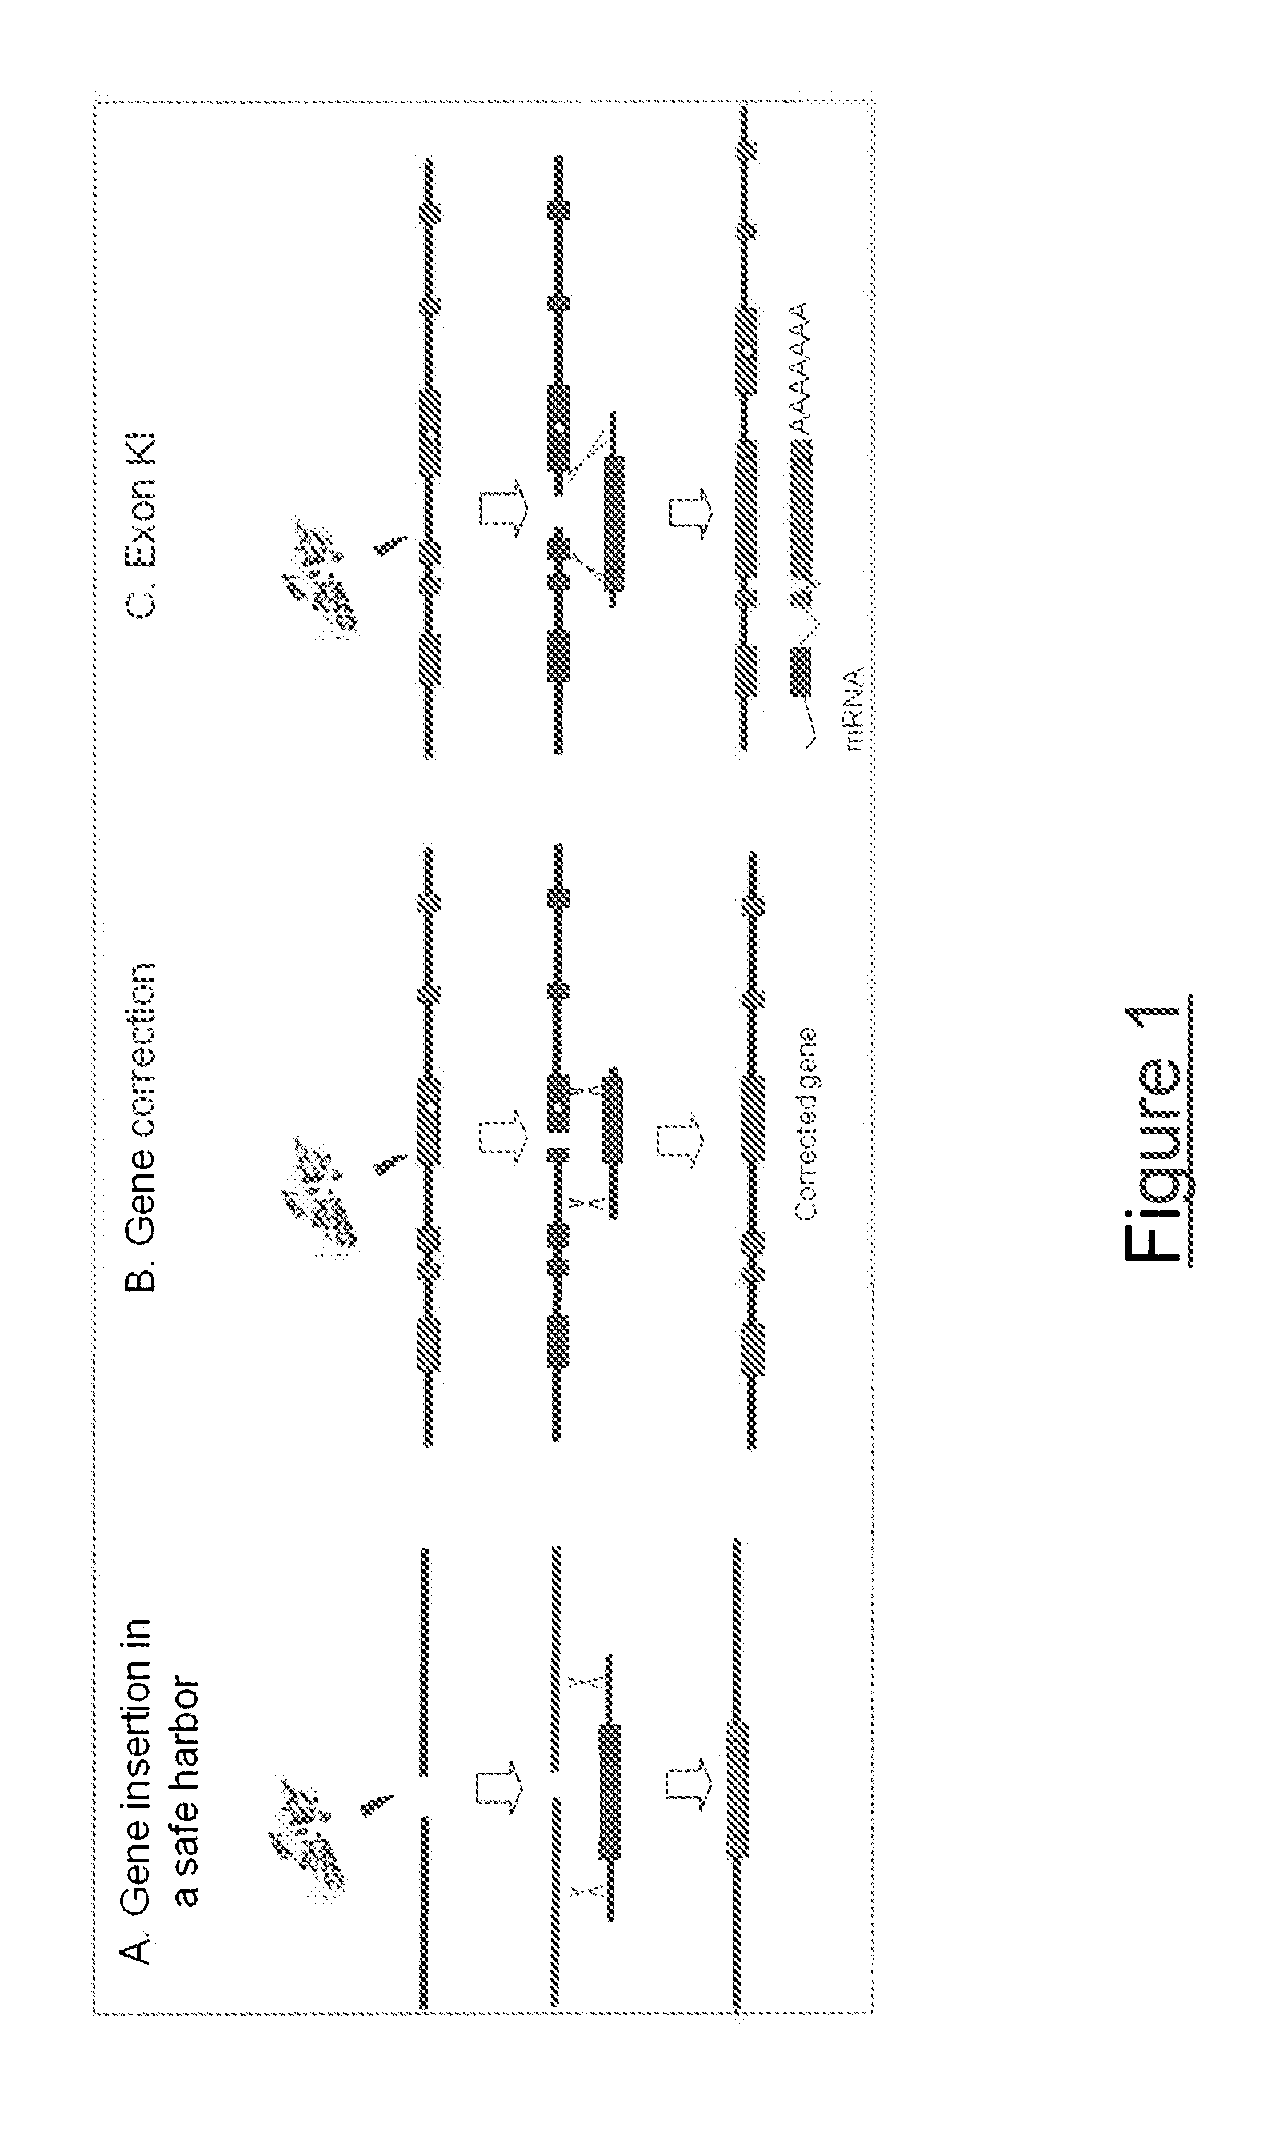 Meganuclease variants cleaving a DNA target sequence from the dystrophin gene and uses thereof